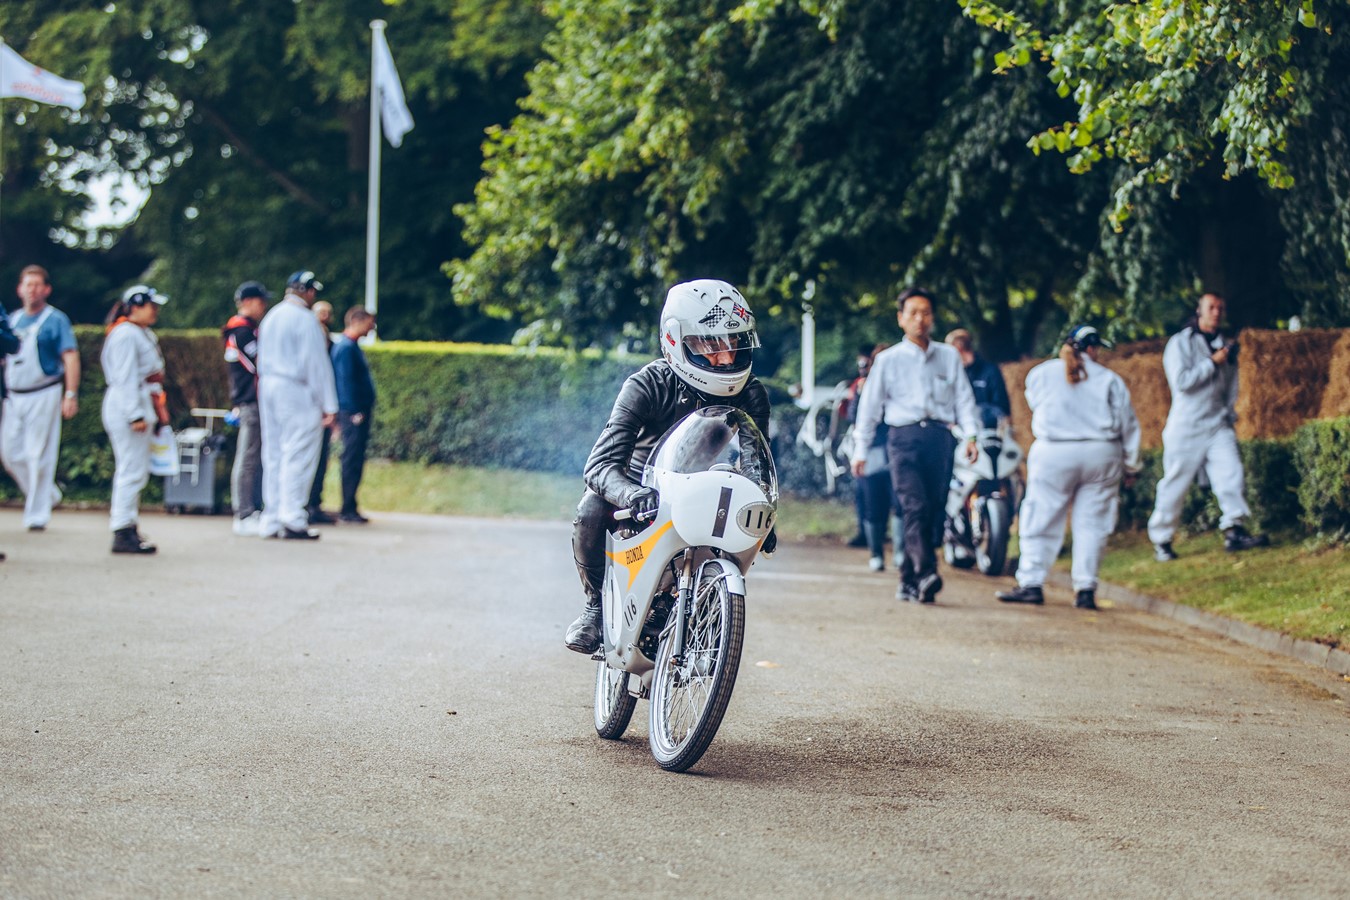 Honda Motorcycles at the 2017 Goodwood Festival of Speed